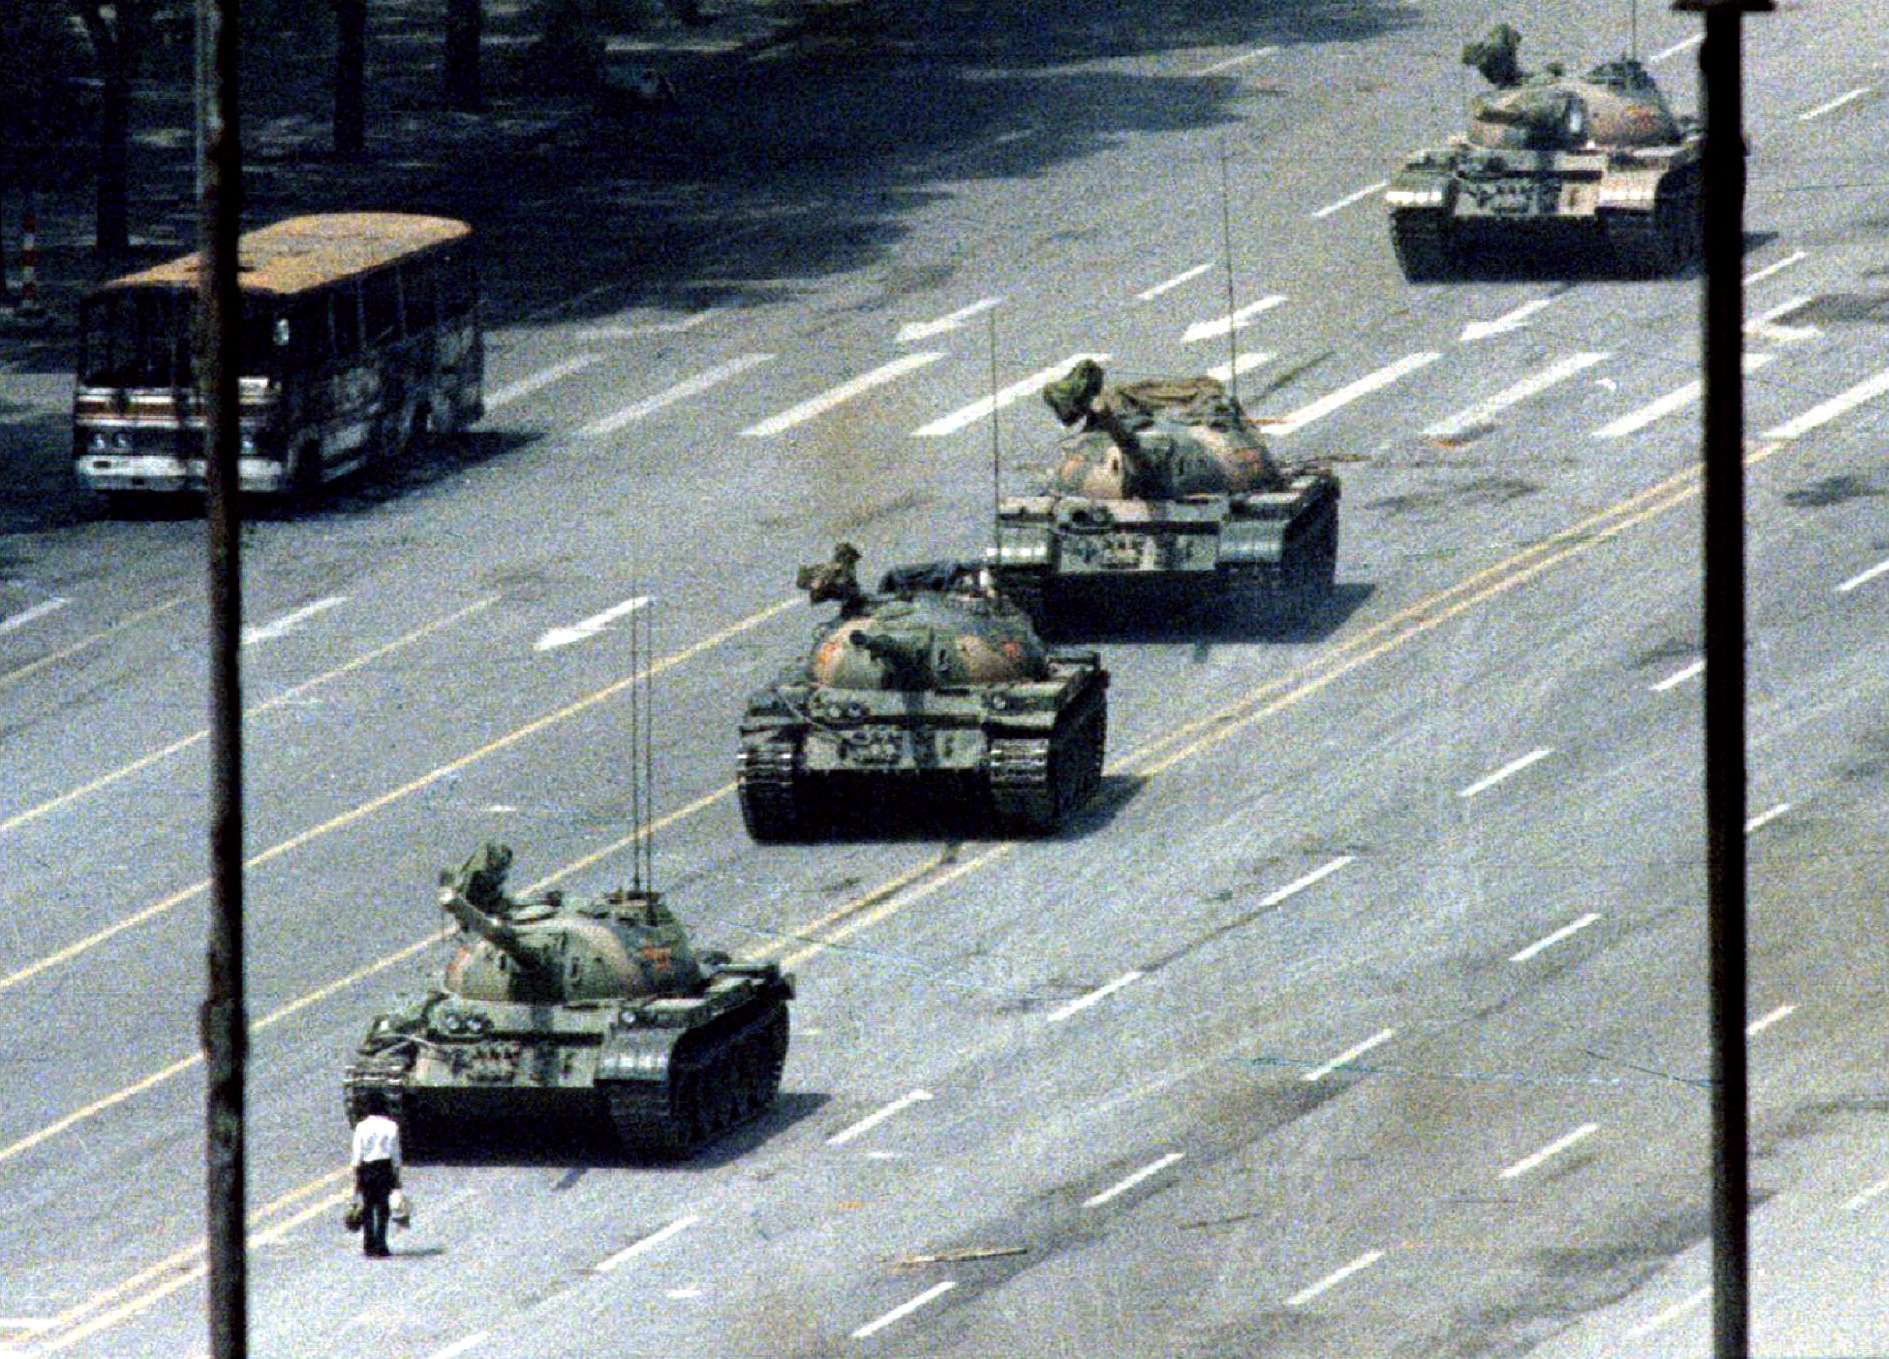 CHINA | S05 Bonus episode - The story behind Bob Hawke’s mysterious Tiananmen Cable